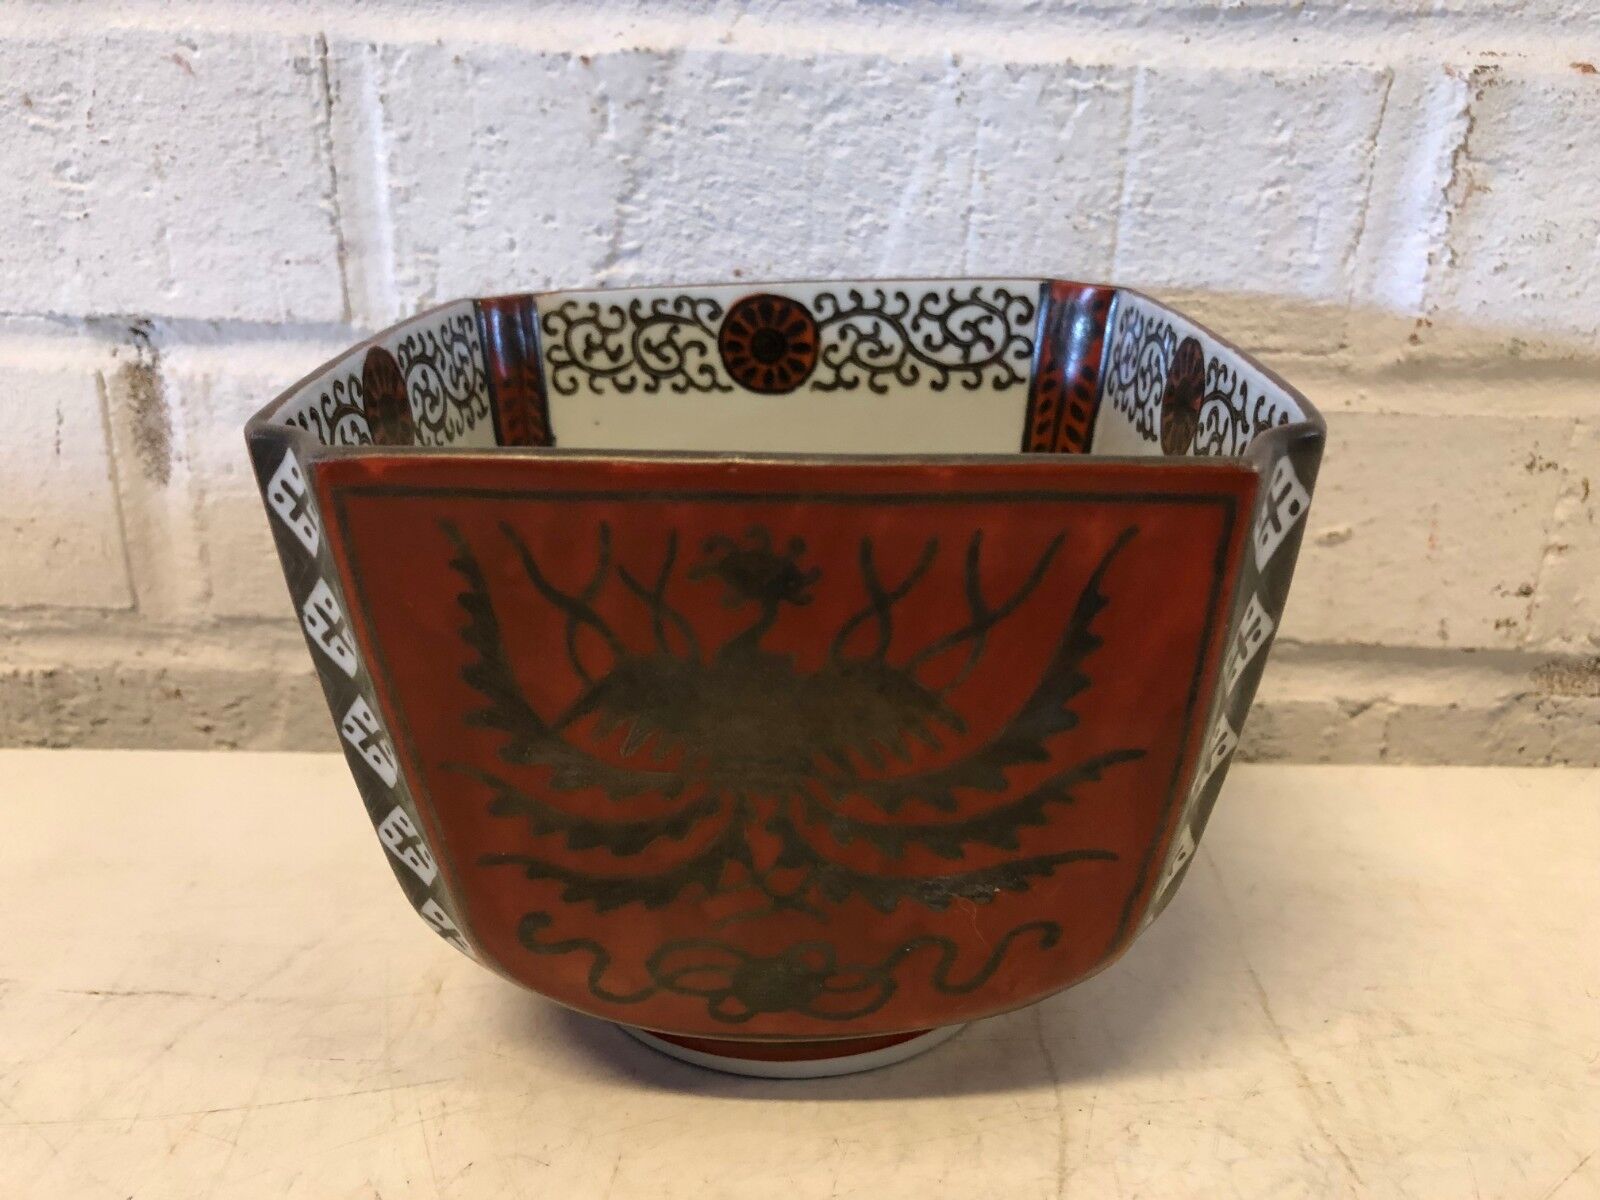 Vintage Chinese Decorative Hand Painted Red & Black Bowl with Bird Decorations